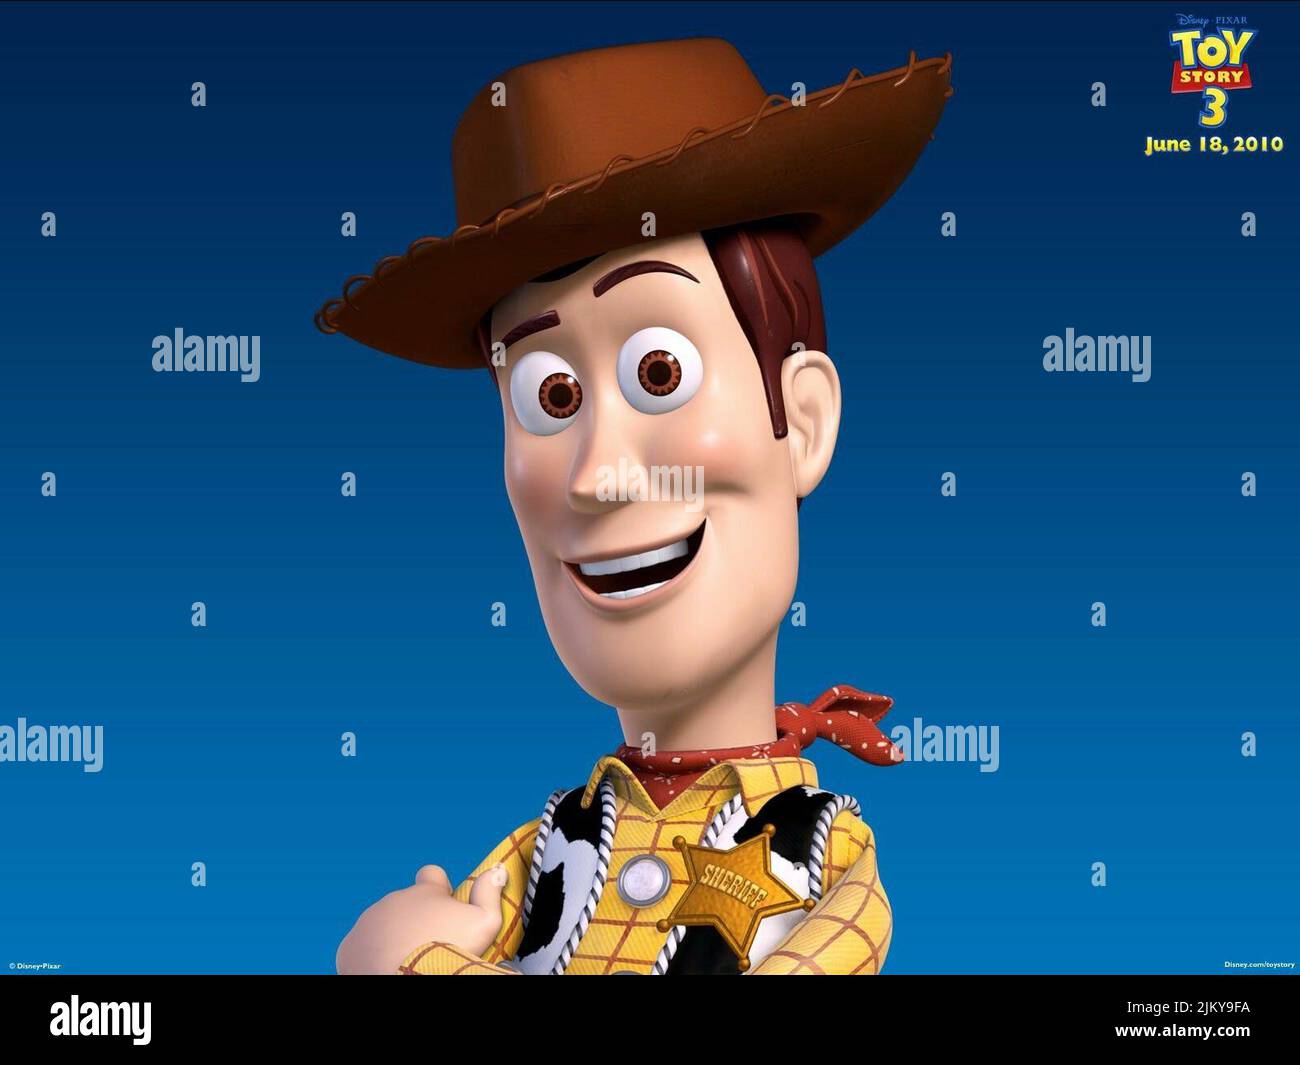 WOODY, TOY STORY 3, 2010 Stock Photo